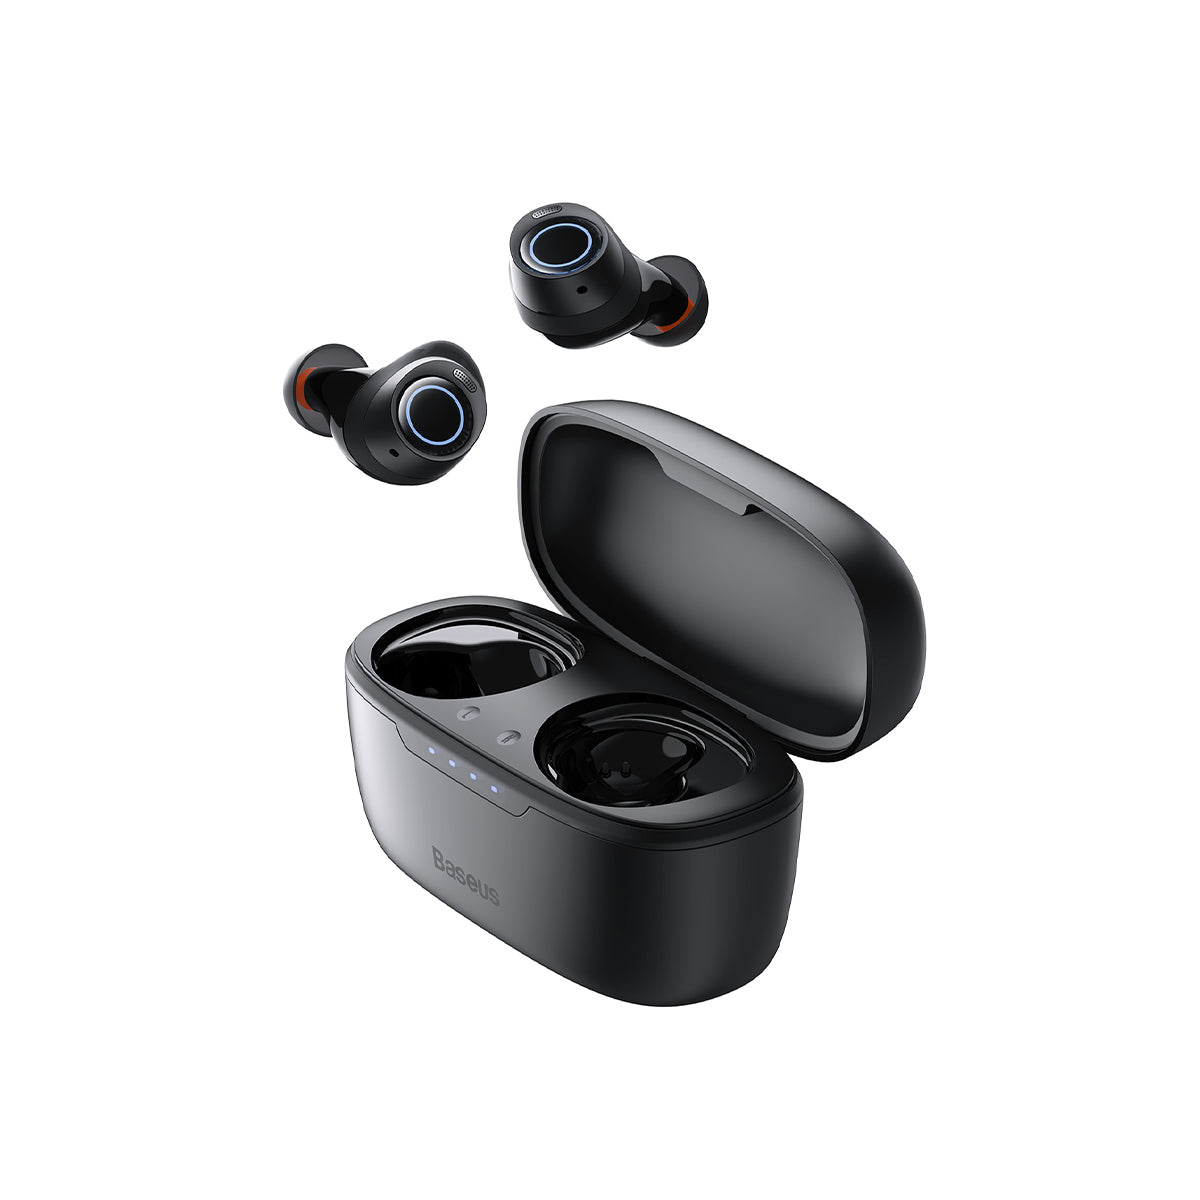 Experience the Baseus Bowie MA10 TWS Wireless Earbuds with ANC for imm